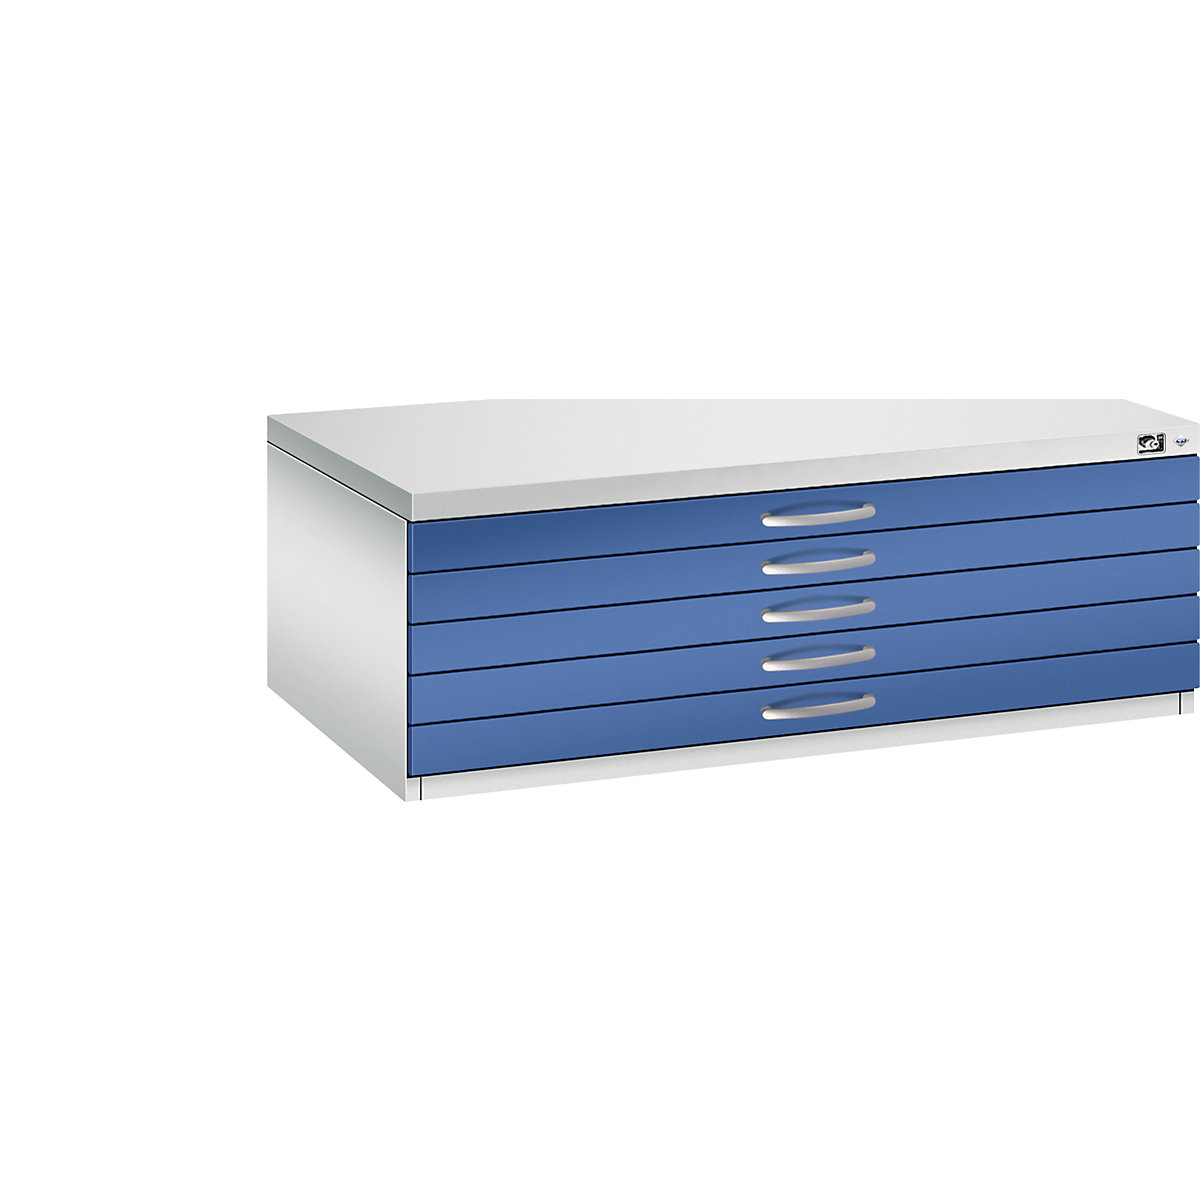 Drawing cabinet – C+P, A1, 5 drawers, height 420 mm, light grey / gentian blue-20